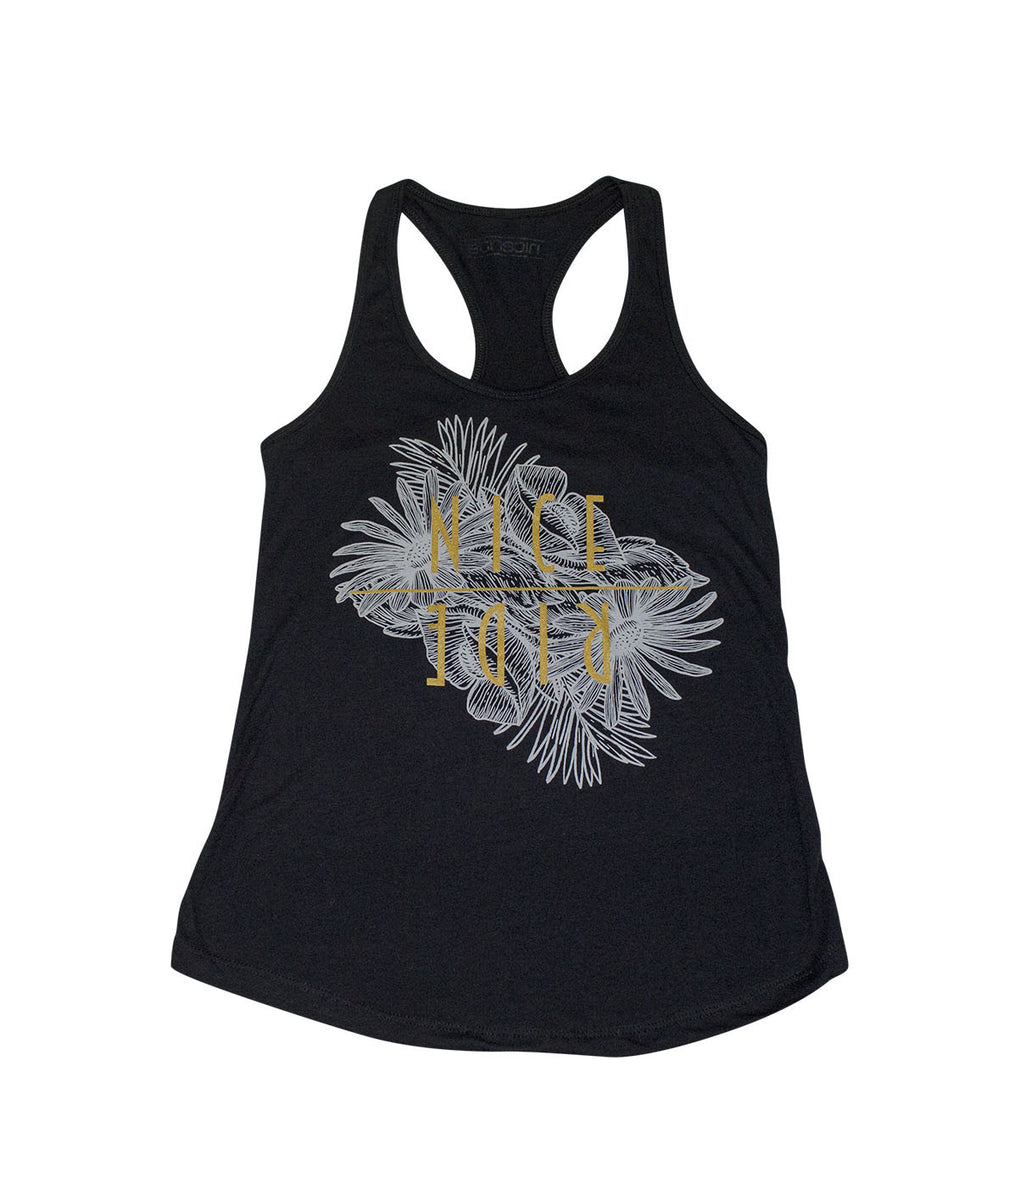 Paradise - Next Level Women's Racerback Tank Top Available In Black Or ...